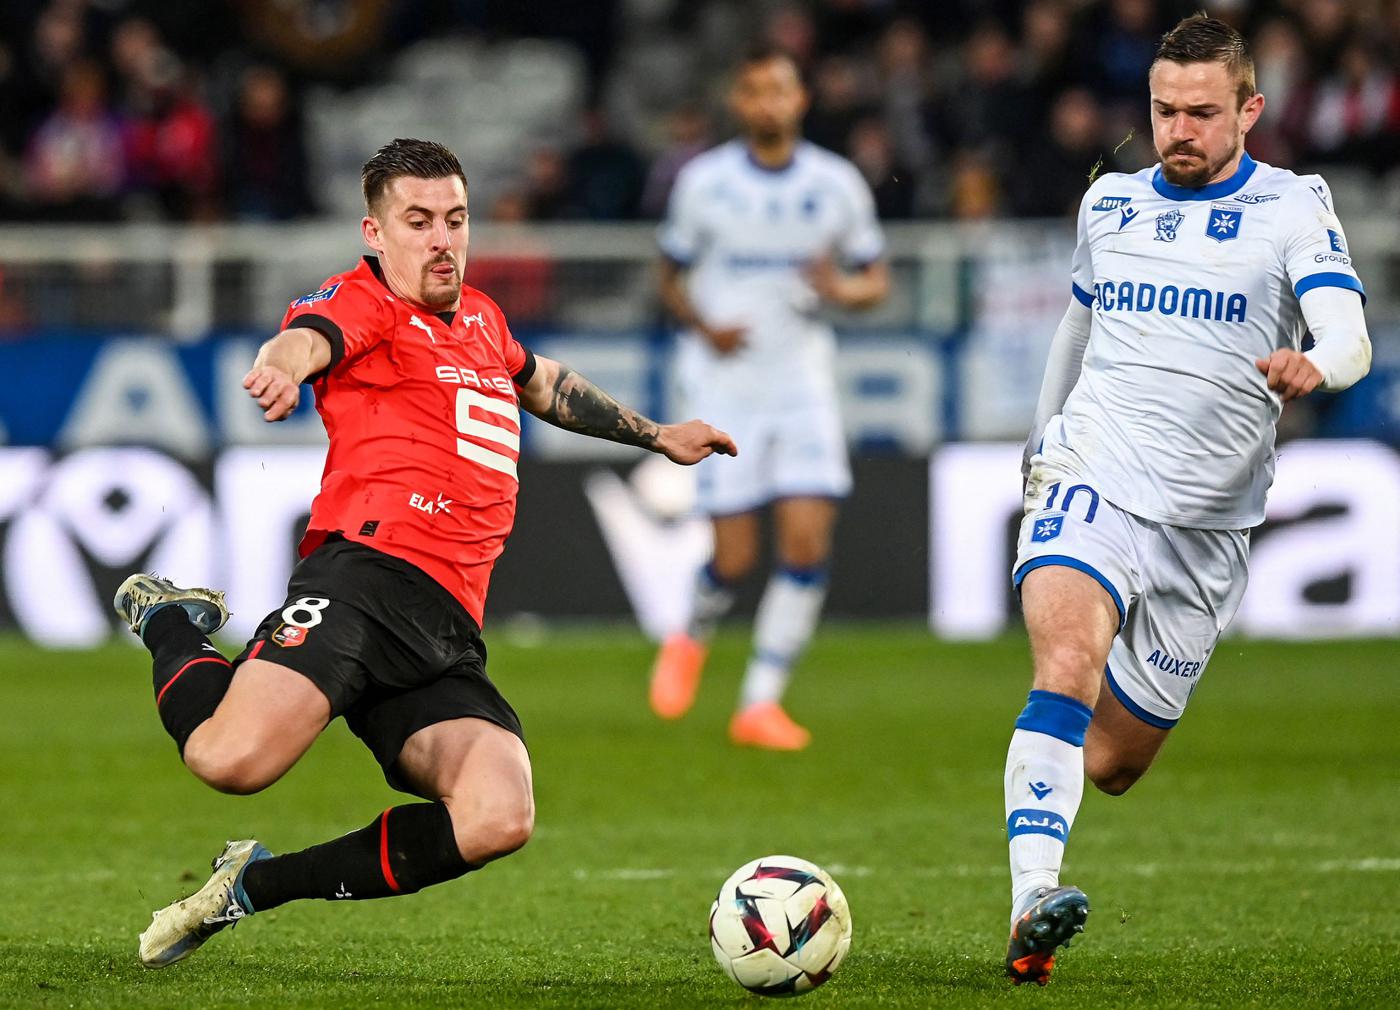 Auxerre - Rennes - 0:0. French Premier League, round 27. Match Review, Statistics